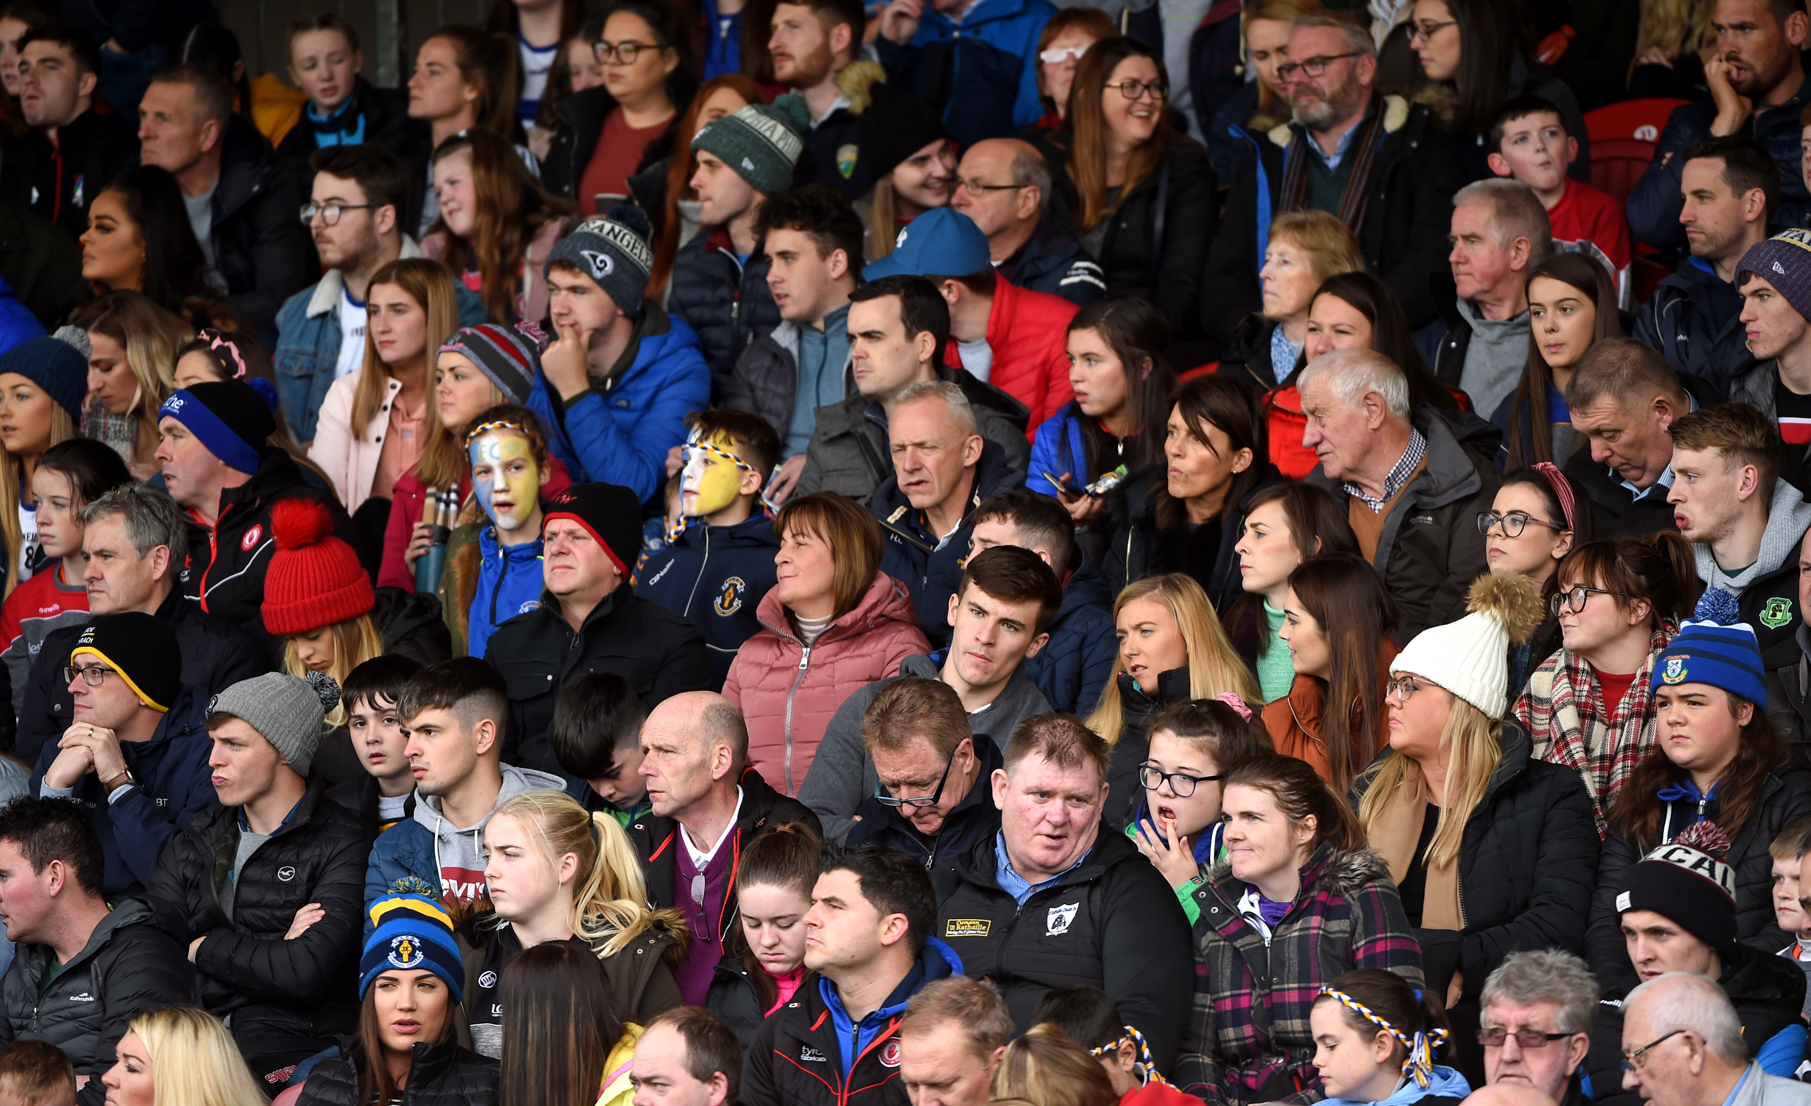 Doubts over crowd sizes for GAA club games